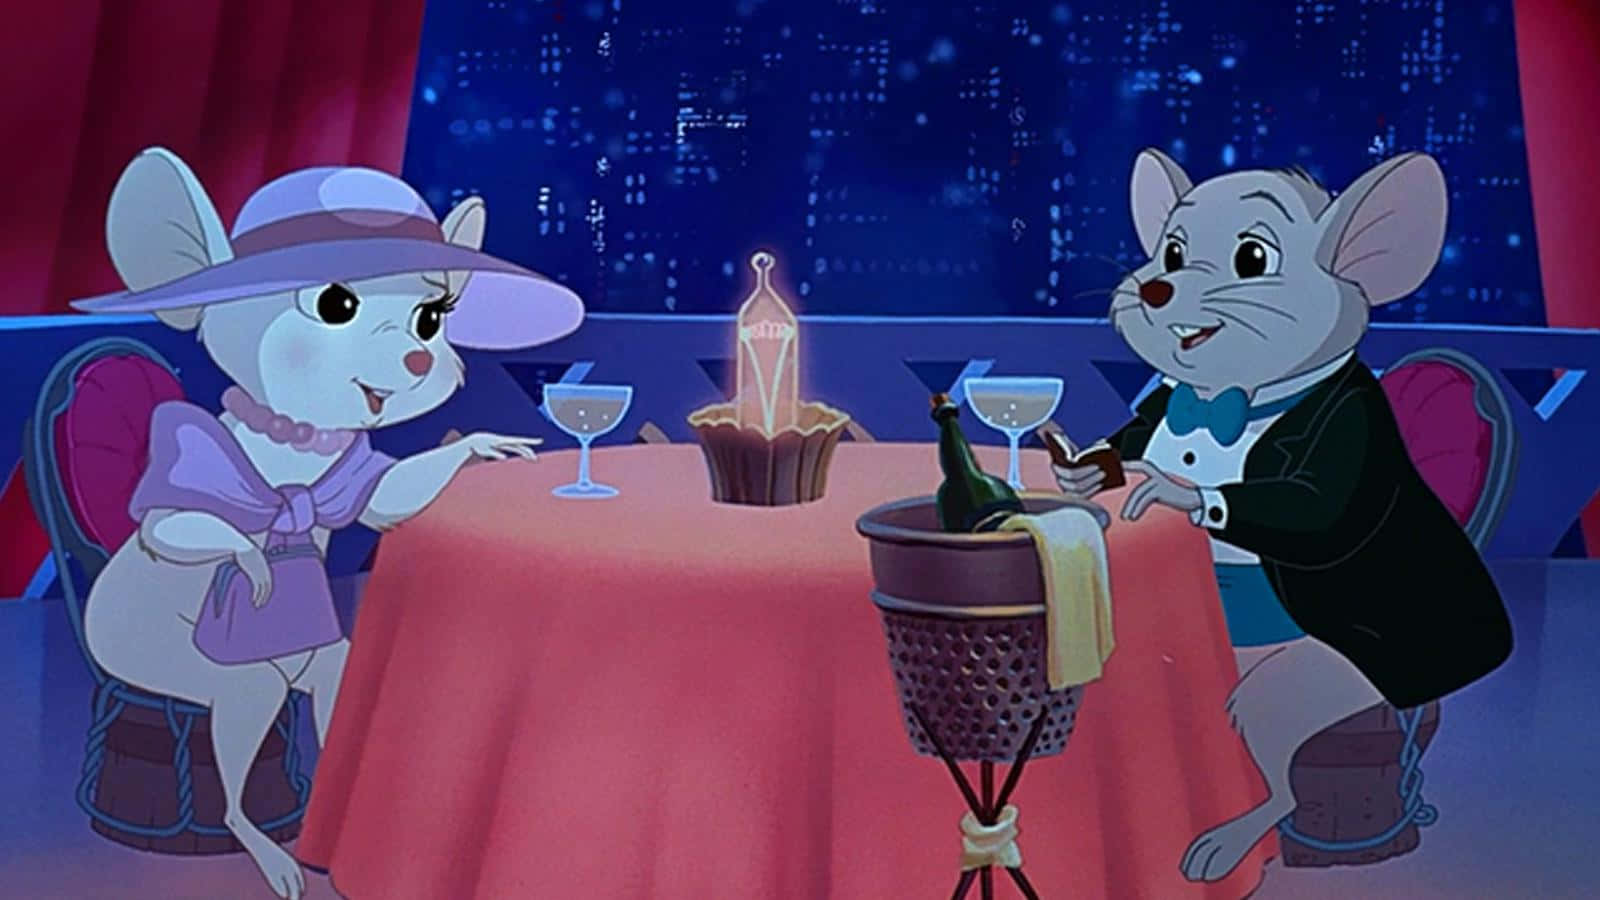 Bernard and Bianca on an adventurous mission in The Rescuers Down Under. Wallpaper